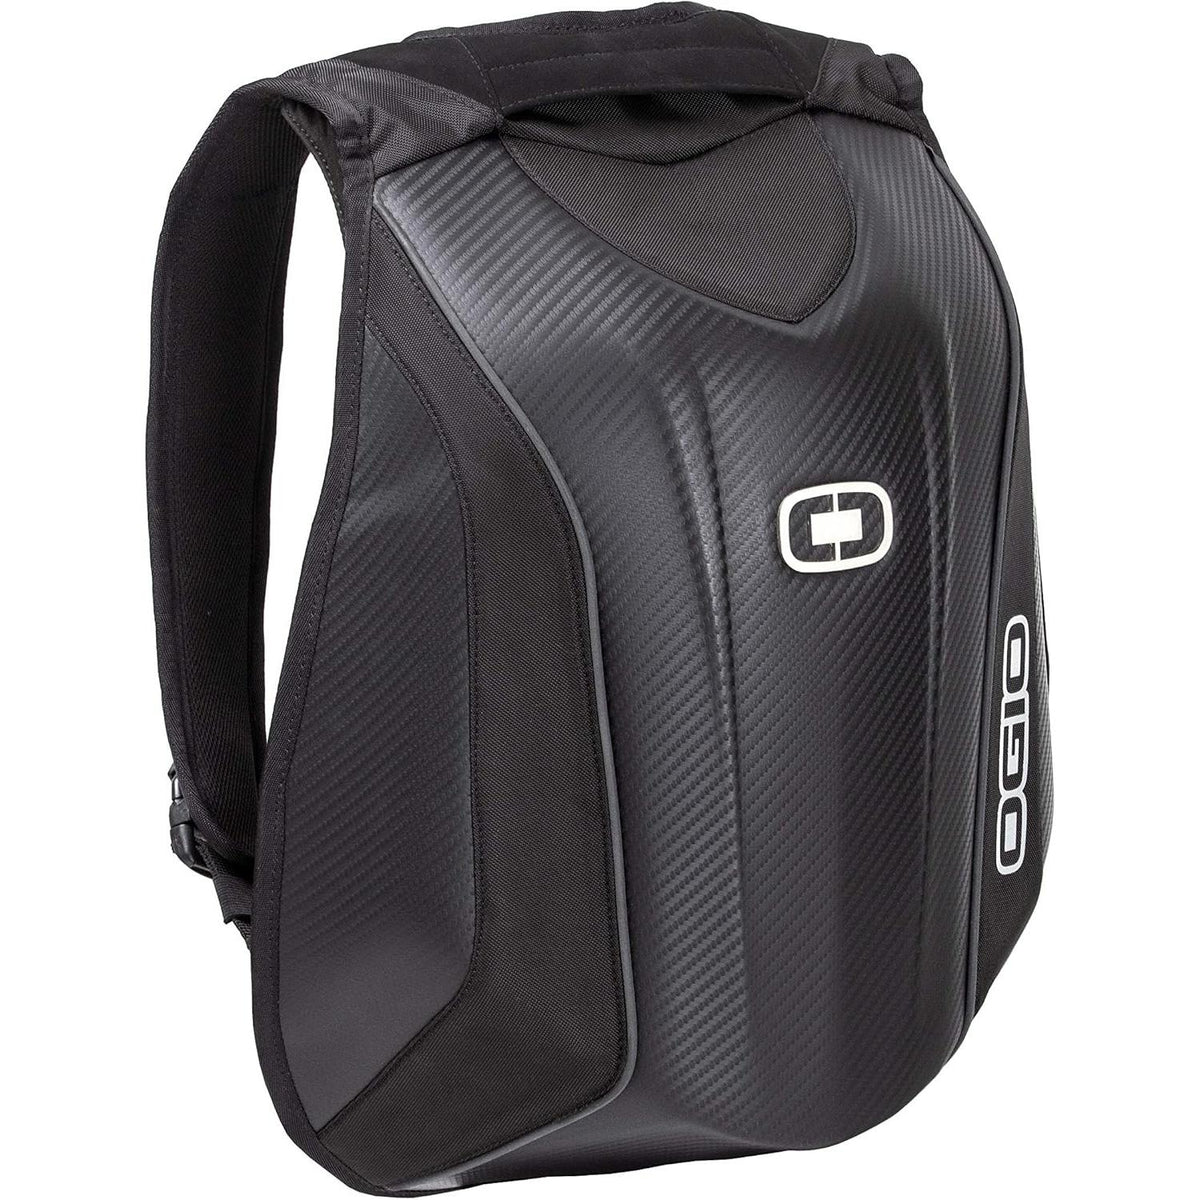 Ogio Mach S Motorcycle Backpack